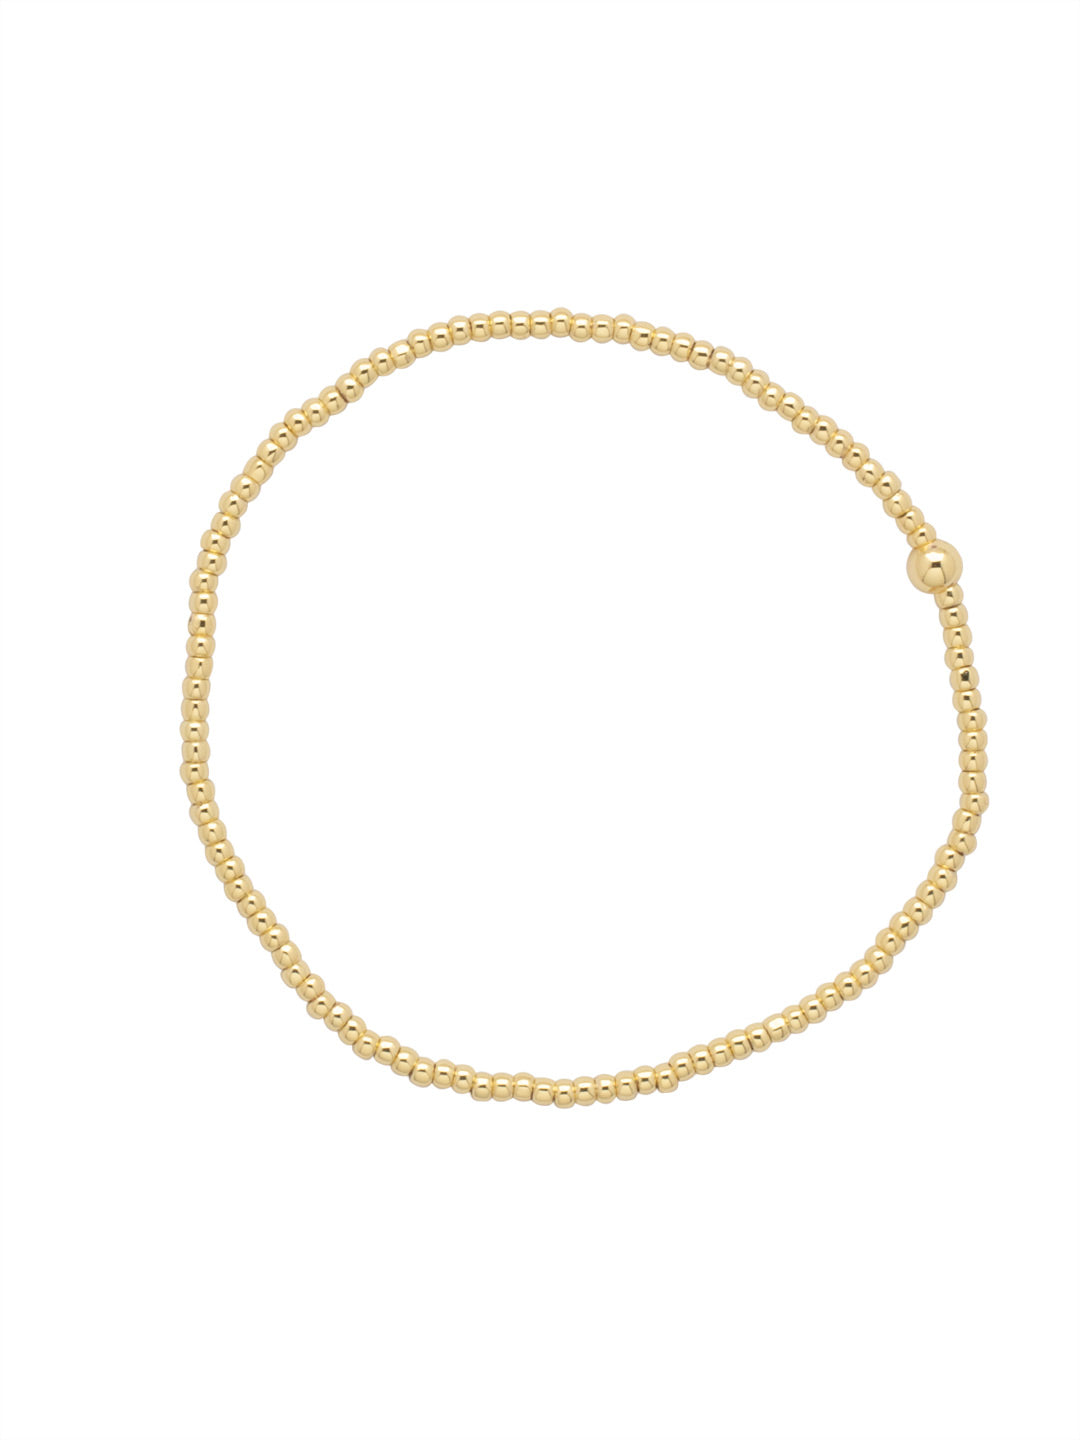 Zuri Stretch Bracelet - BFN30BGMTL - <p>The Zuri Stretch Bracelet features mini repeating metal beads on a multi-layered stretchy jewelry filament, creating a durable and trendy piece. From Sorrelli's Bare Metallic collection in our Bright Gold-tone finish.</p>